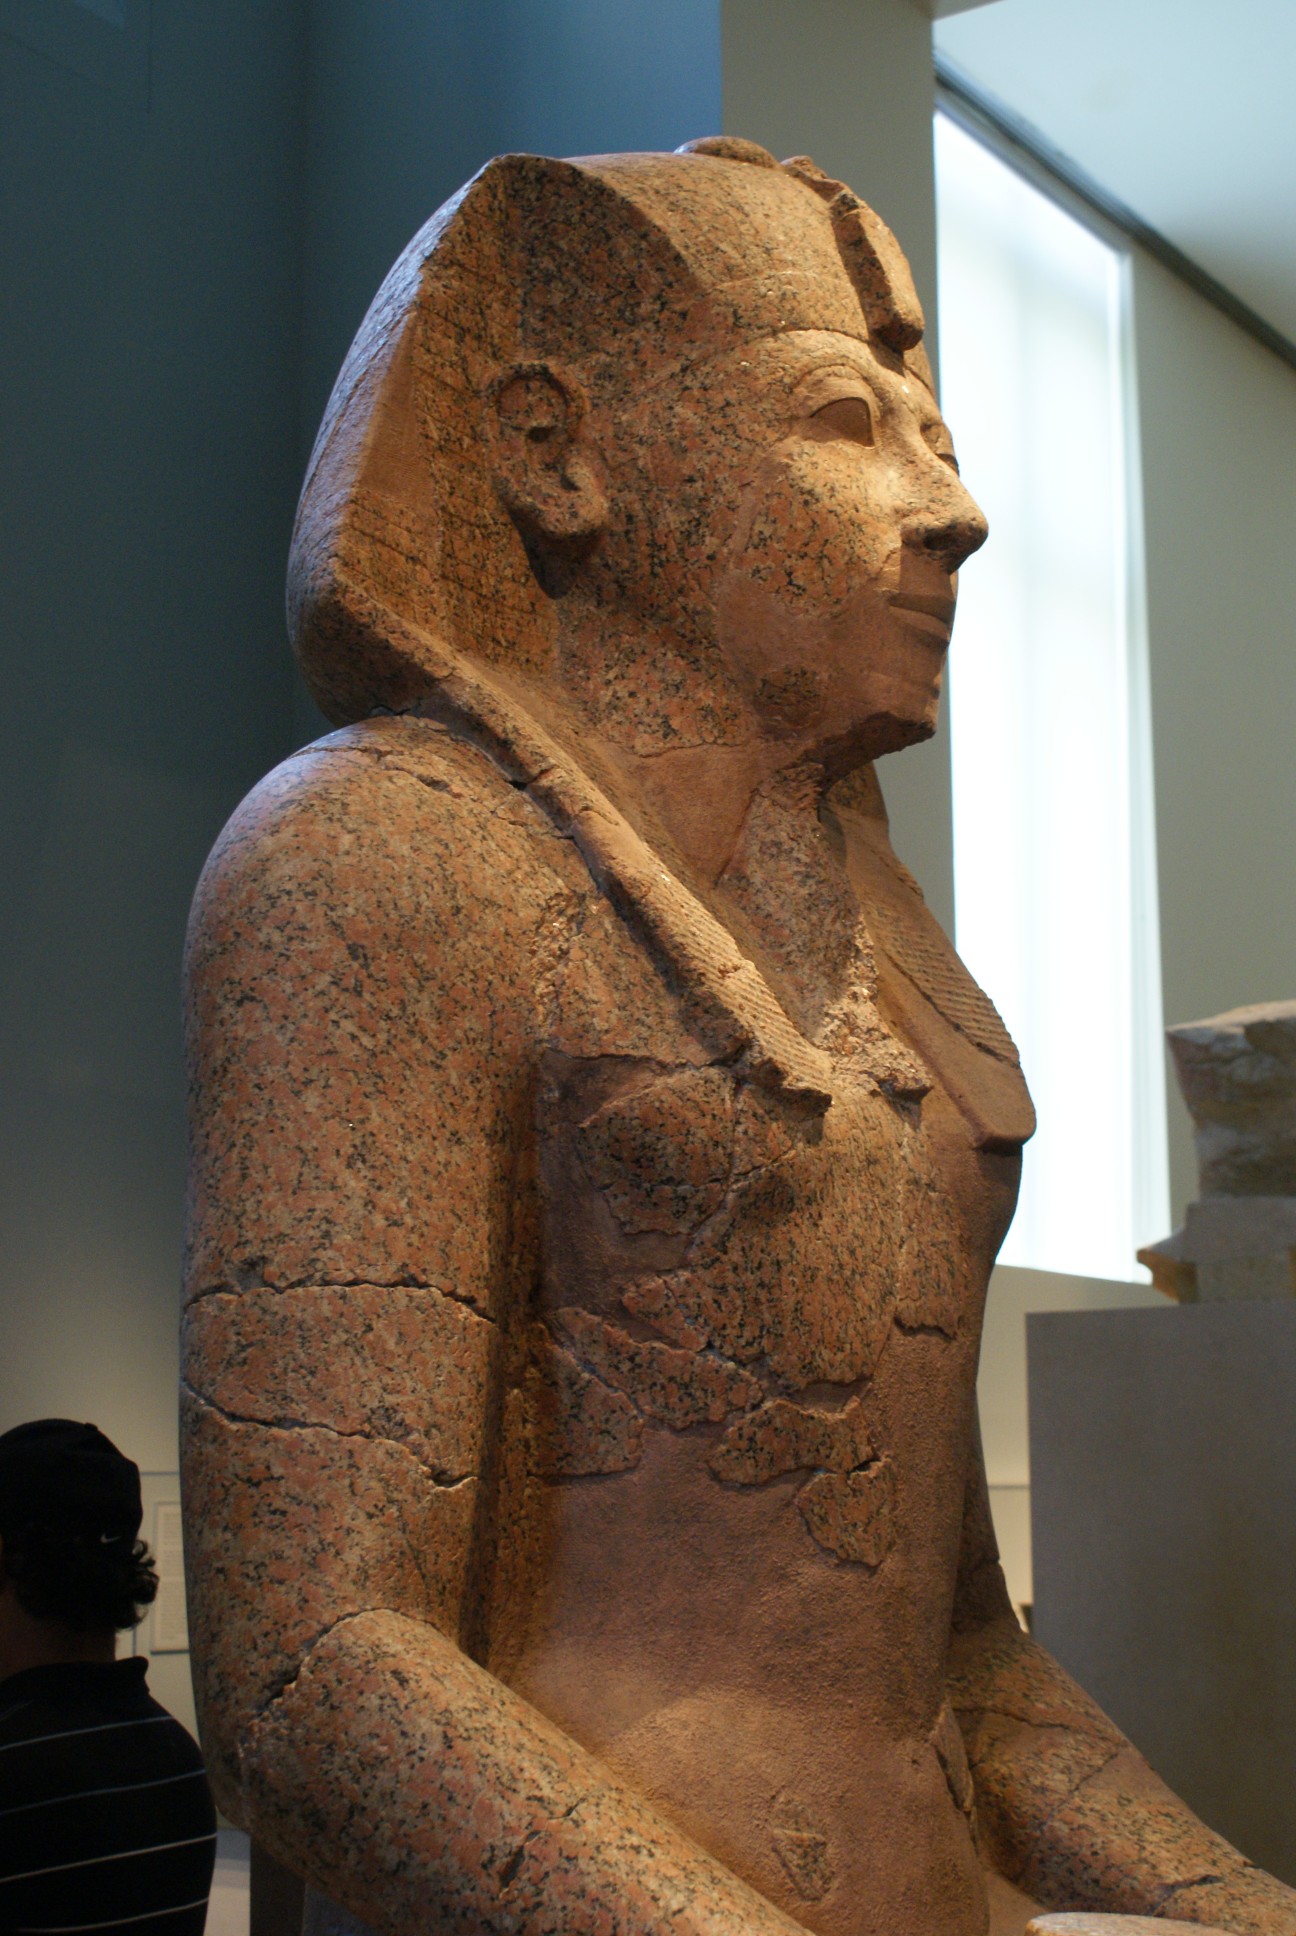 a large statue is shown in a museum